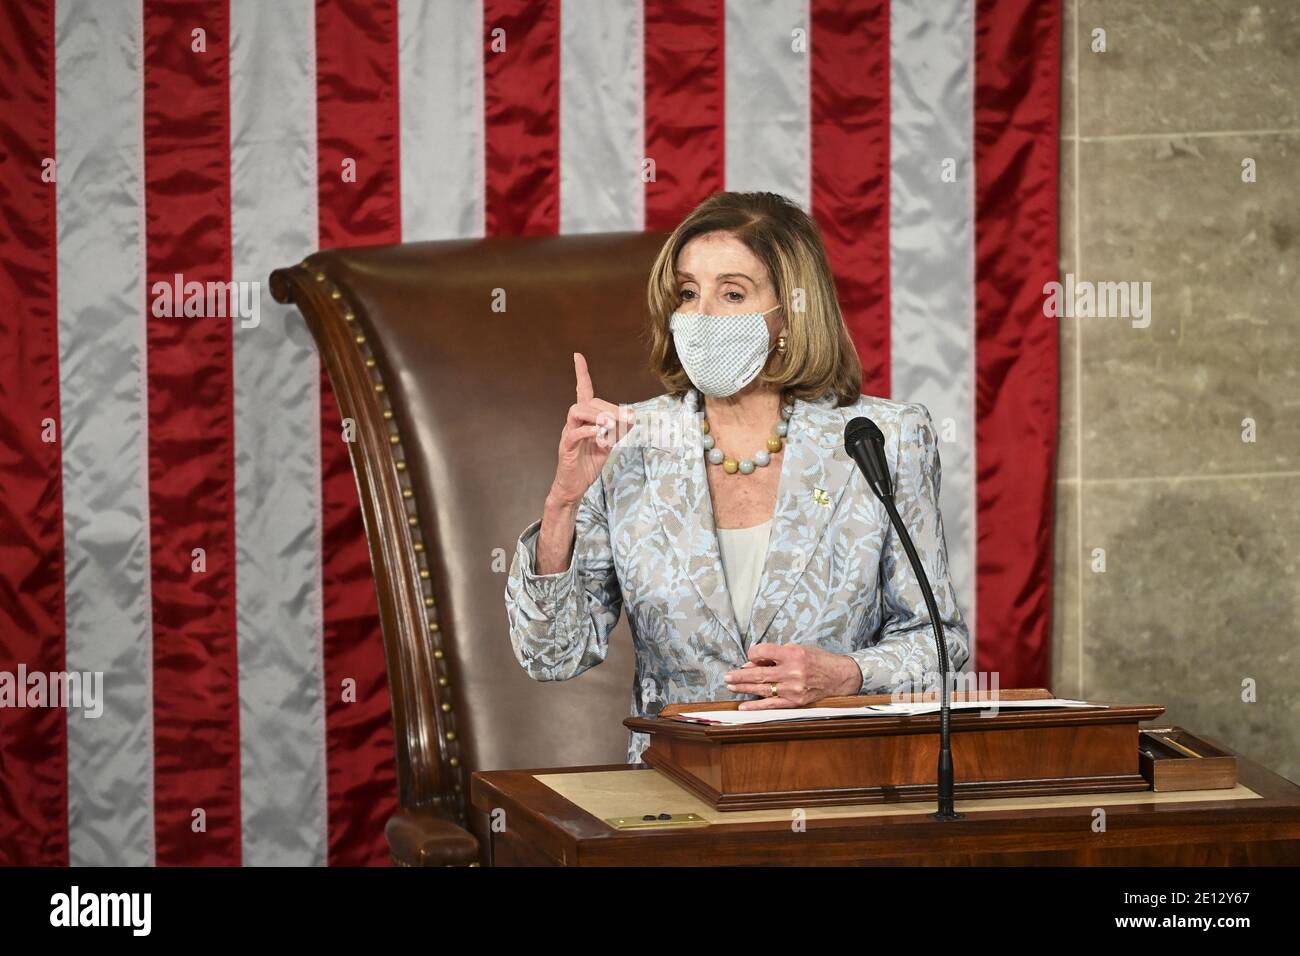 Washington, DC - January 03: House Speaker Nancy Pelosi (D-Calif.) speaks on the opening day of the 117th Congress at the U.S. Capitol in Washington, DC on January 3, 2021. Photo by Bill O'Leary/Pool/ABACAPRESS.COM Stock Photo